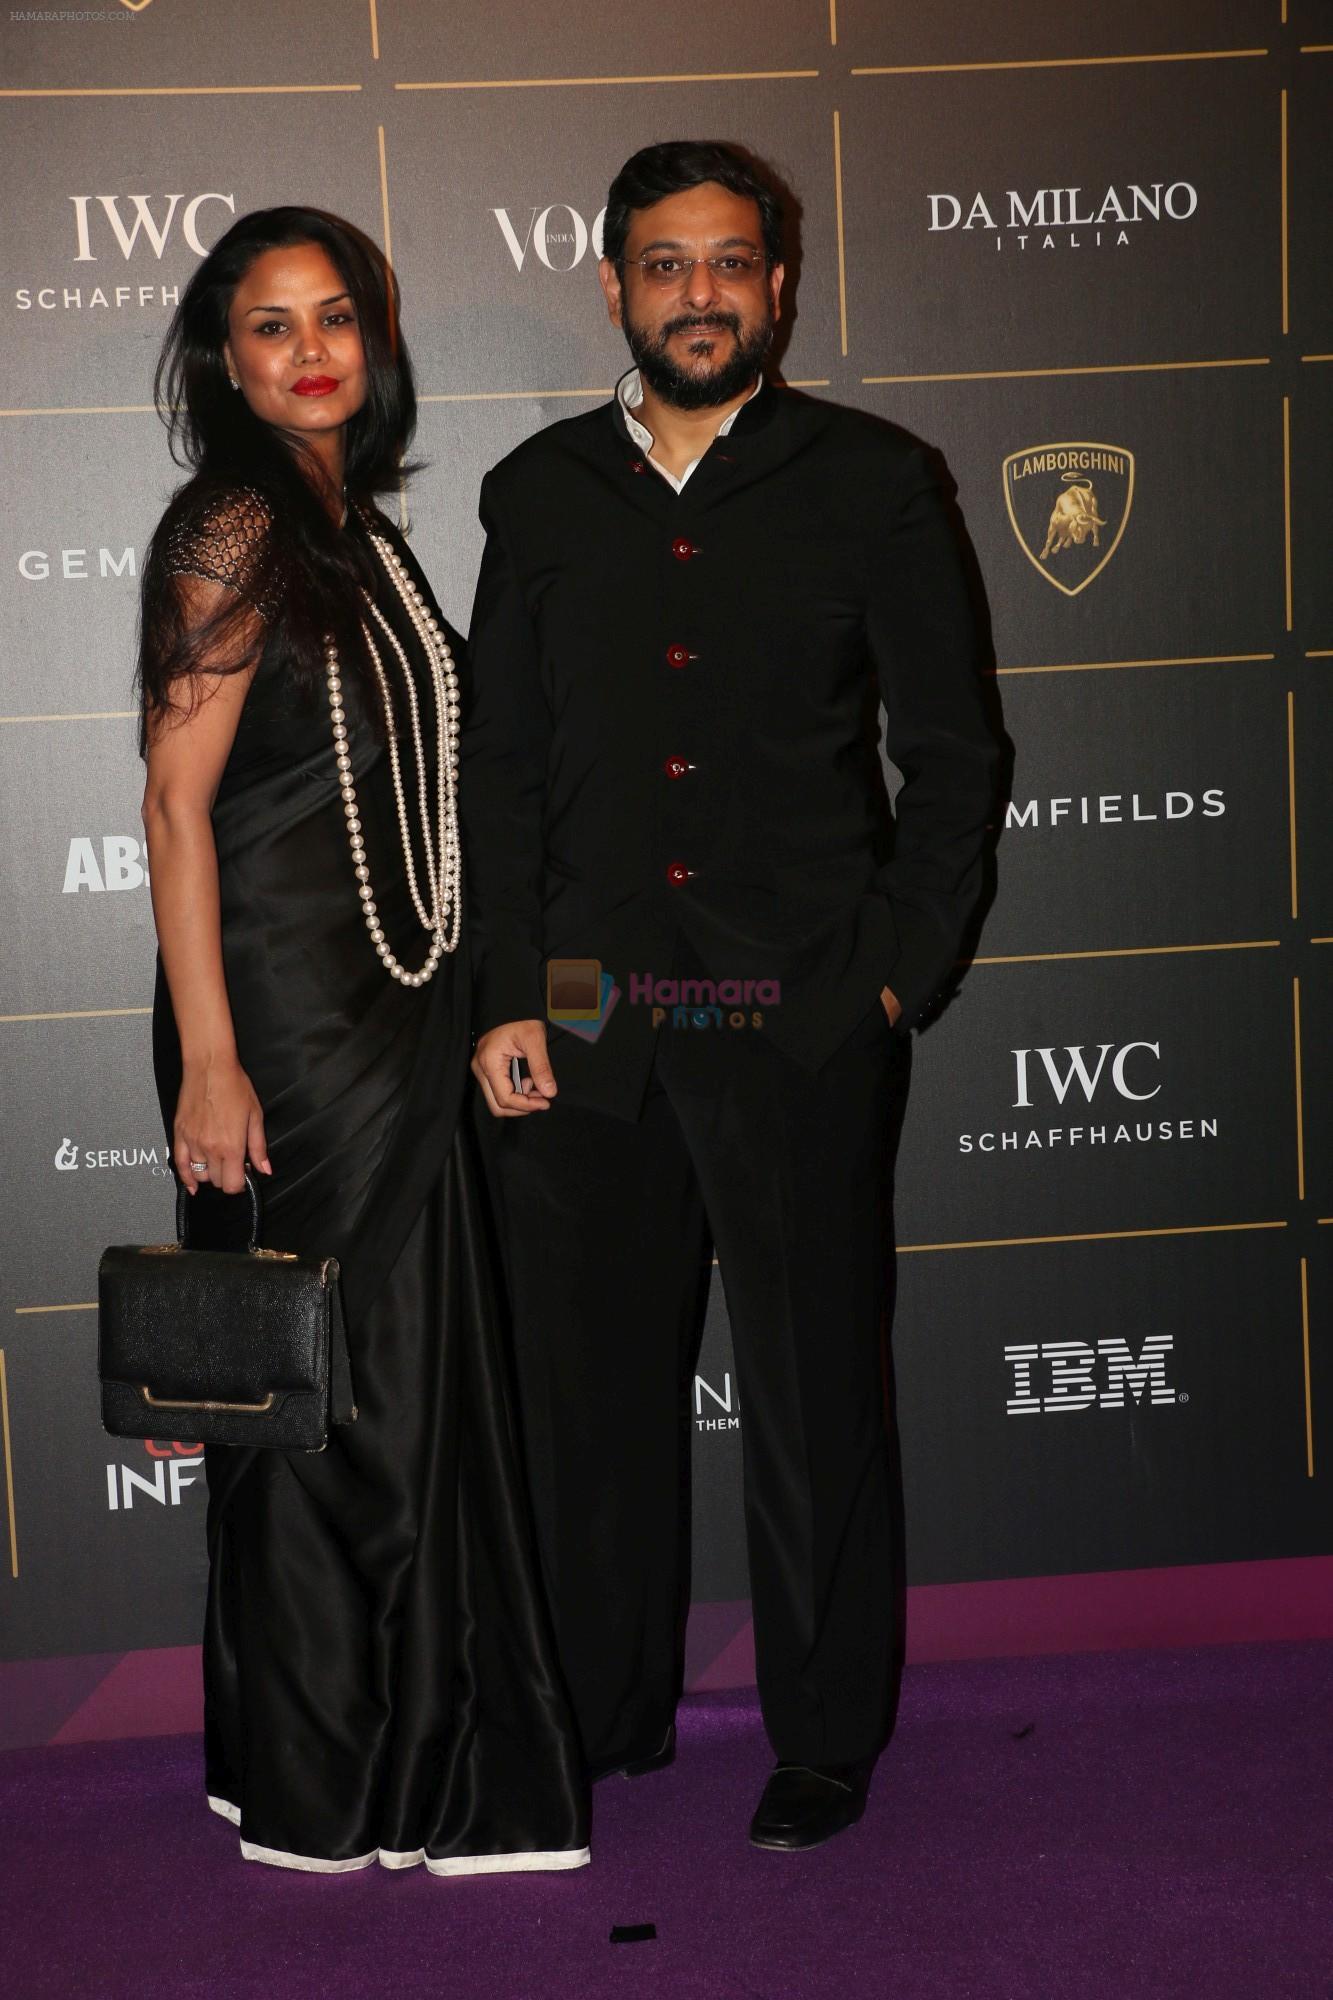 at The Vogue Women Of The Year Awards 2018 on 27th Oct 2018